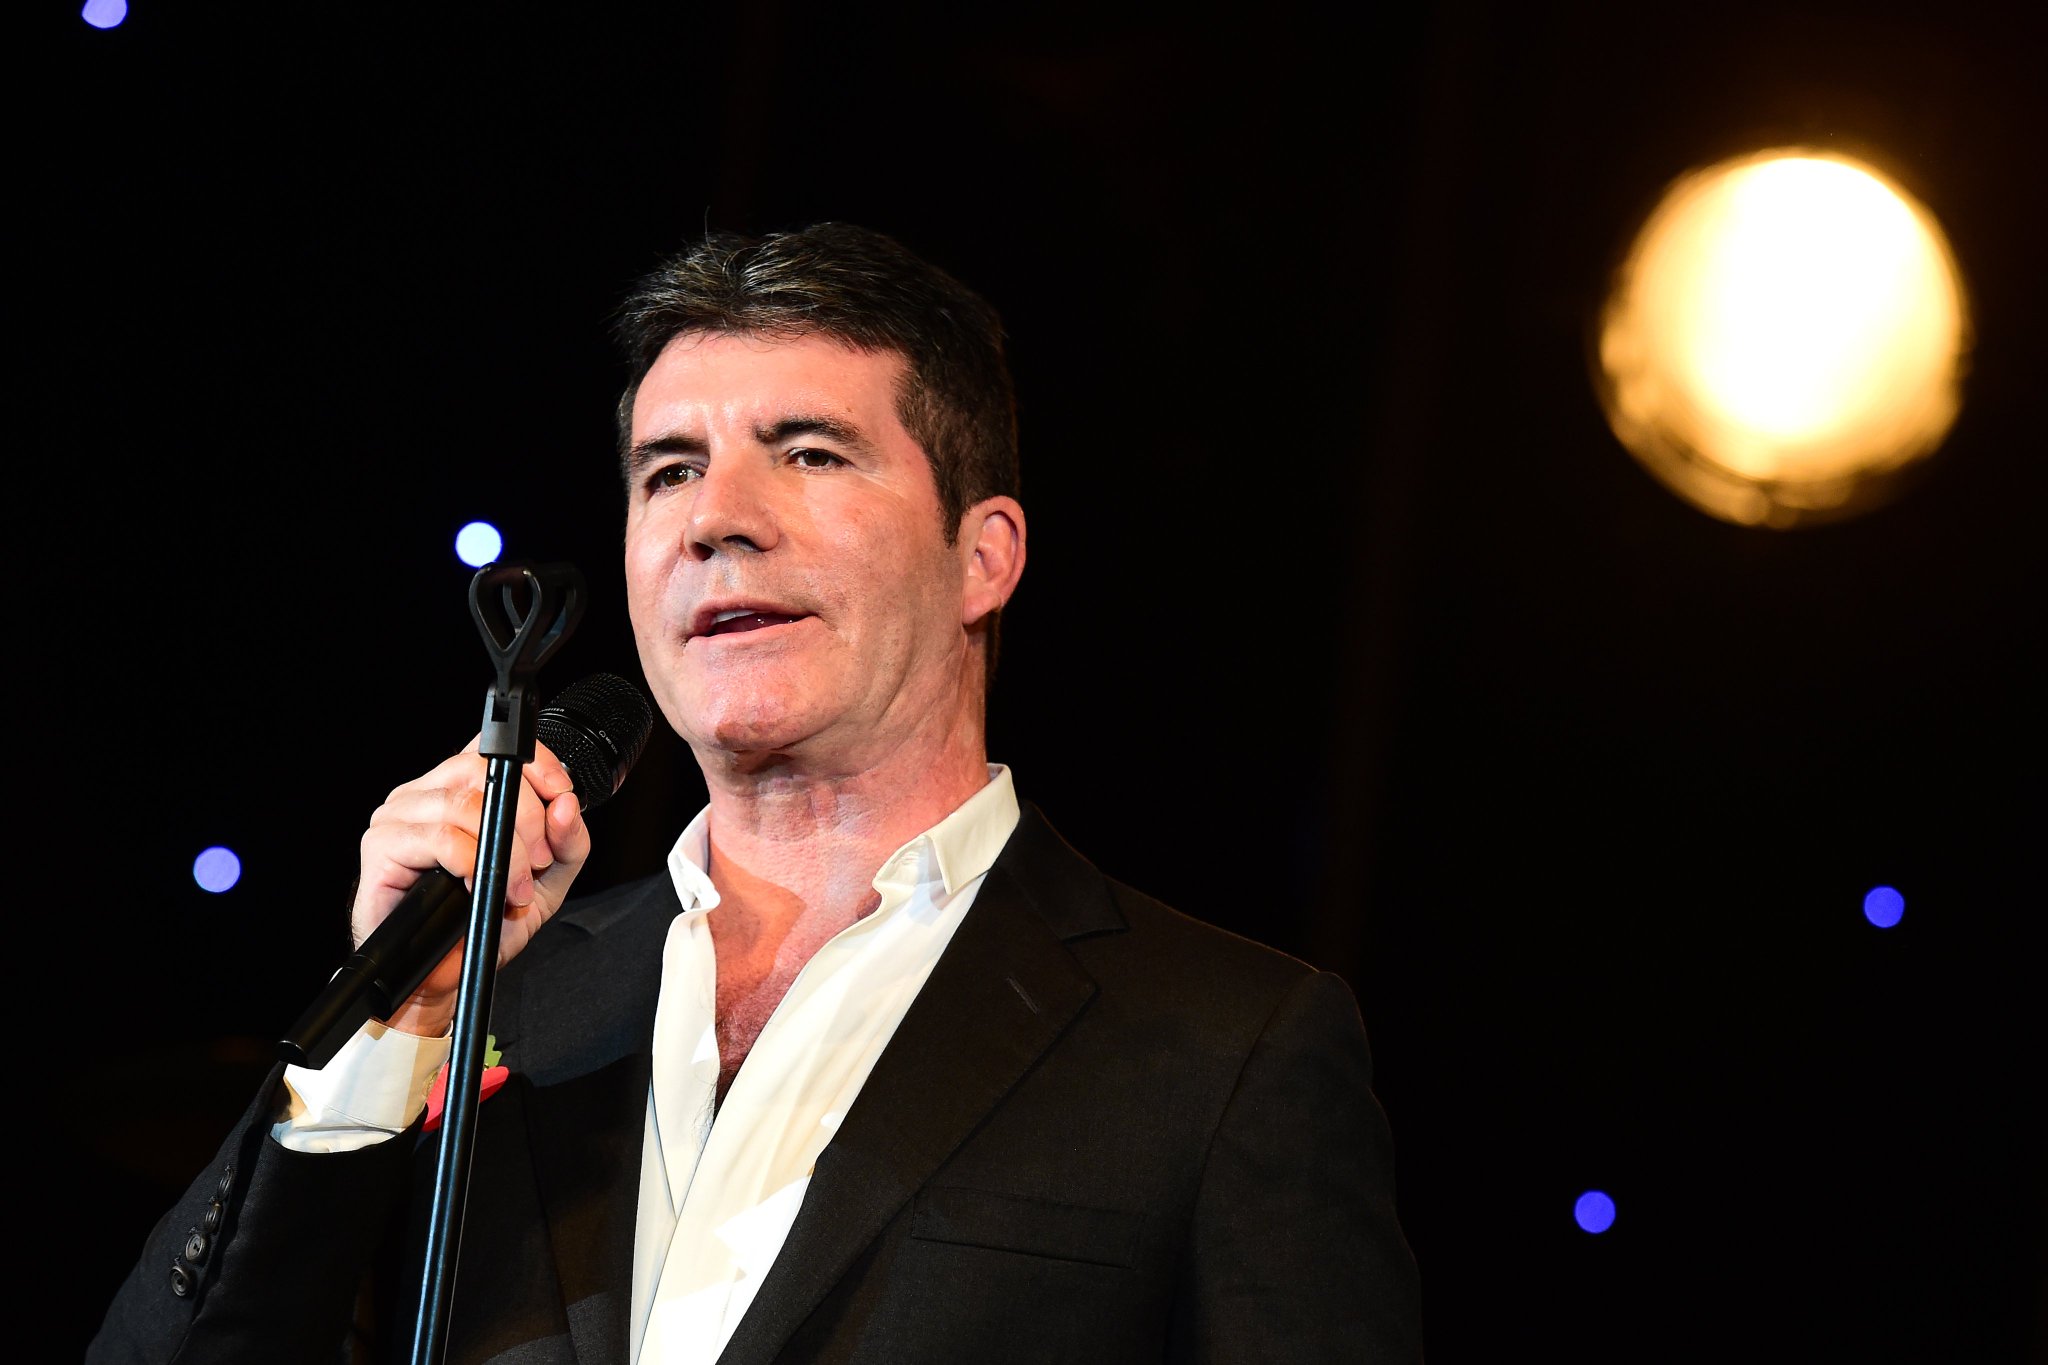 Happy Birthday Simon Cowell! Who is your favourite winner from one of his shows? 